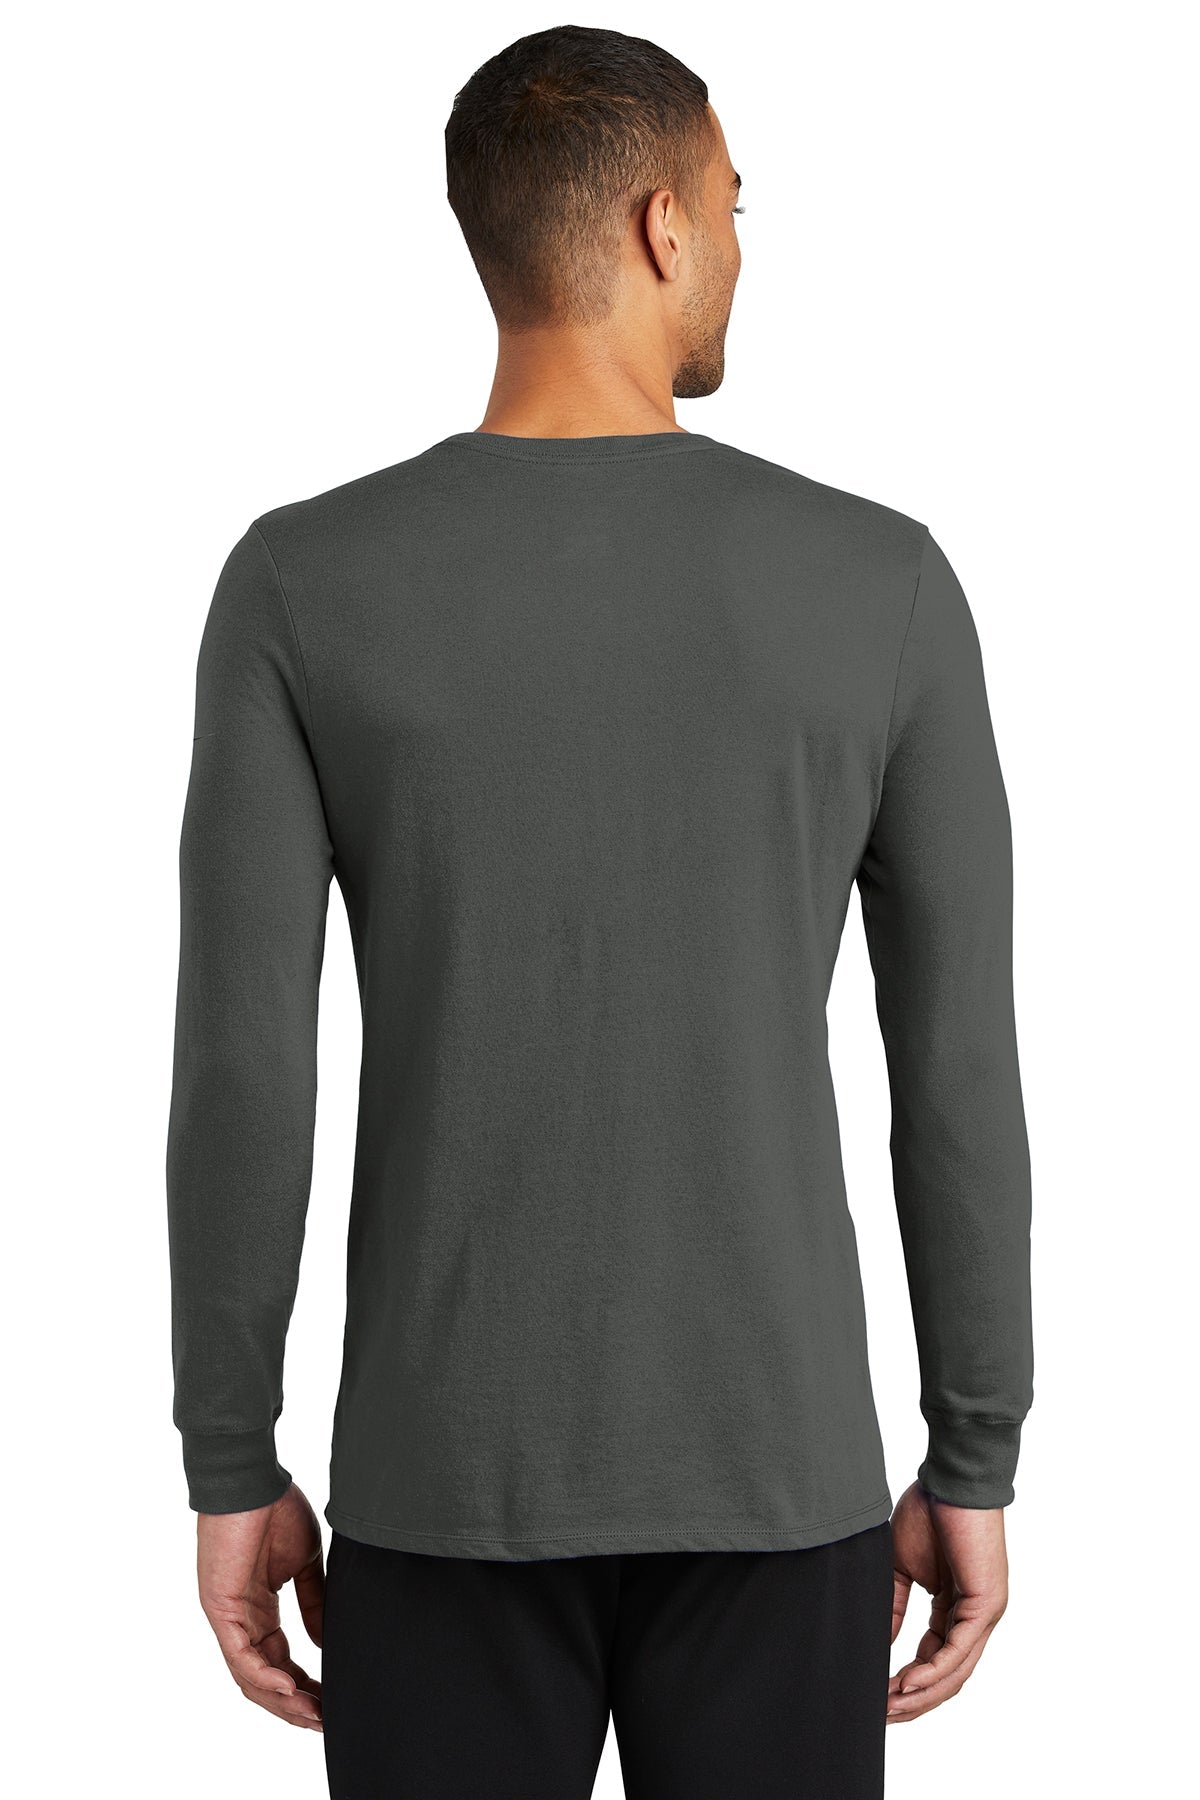 nike-dri-fit-cotton-poly-long-sleeve-tee-nkbq5230-anthracite